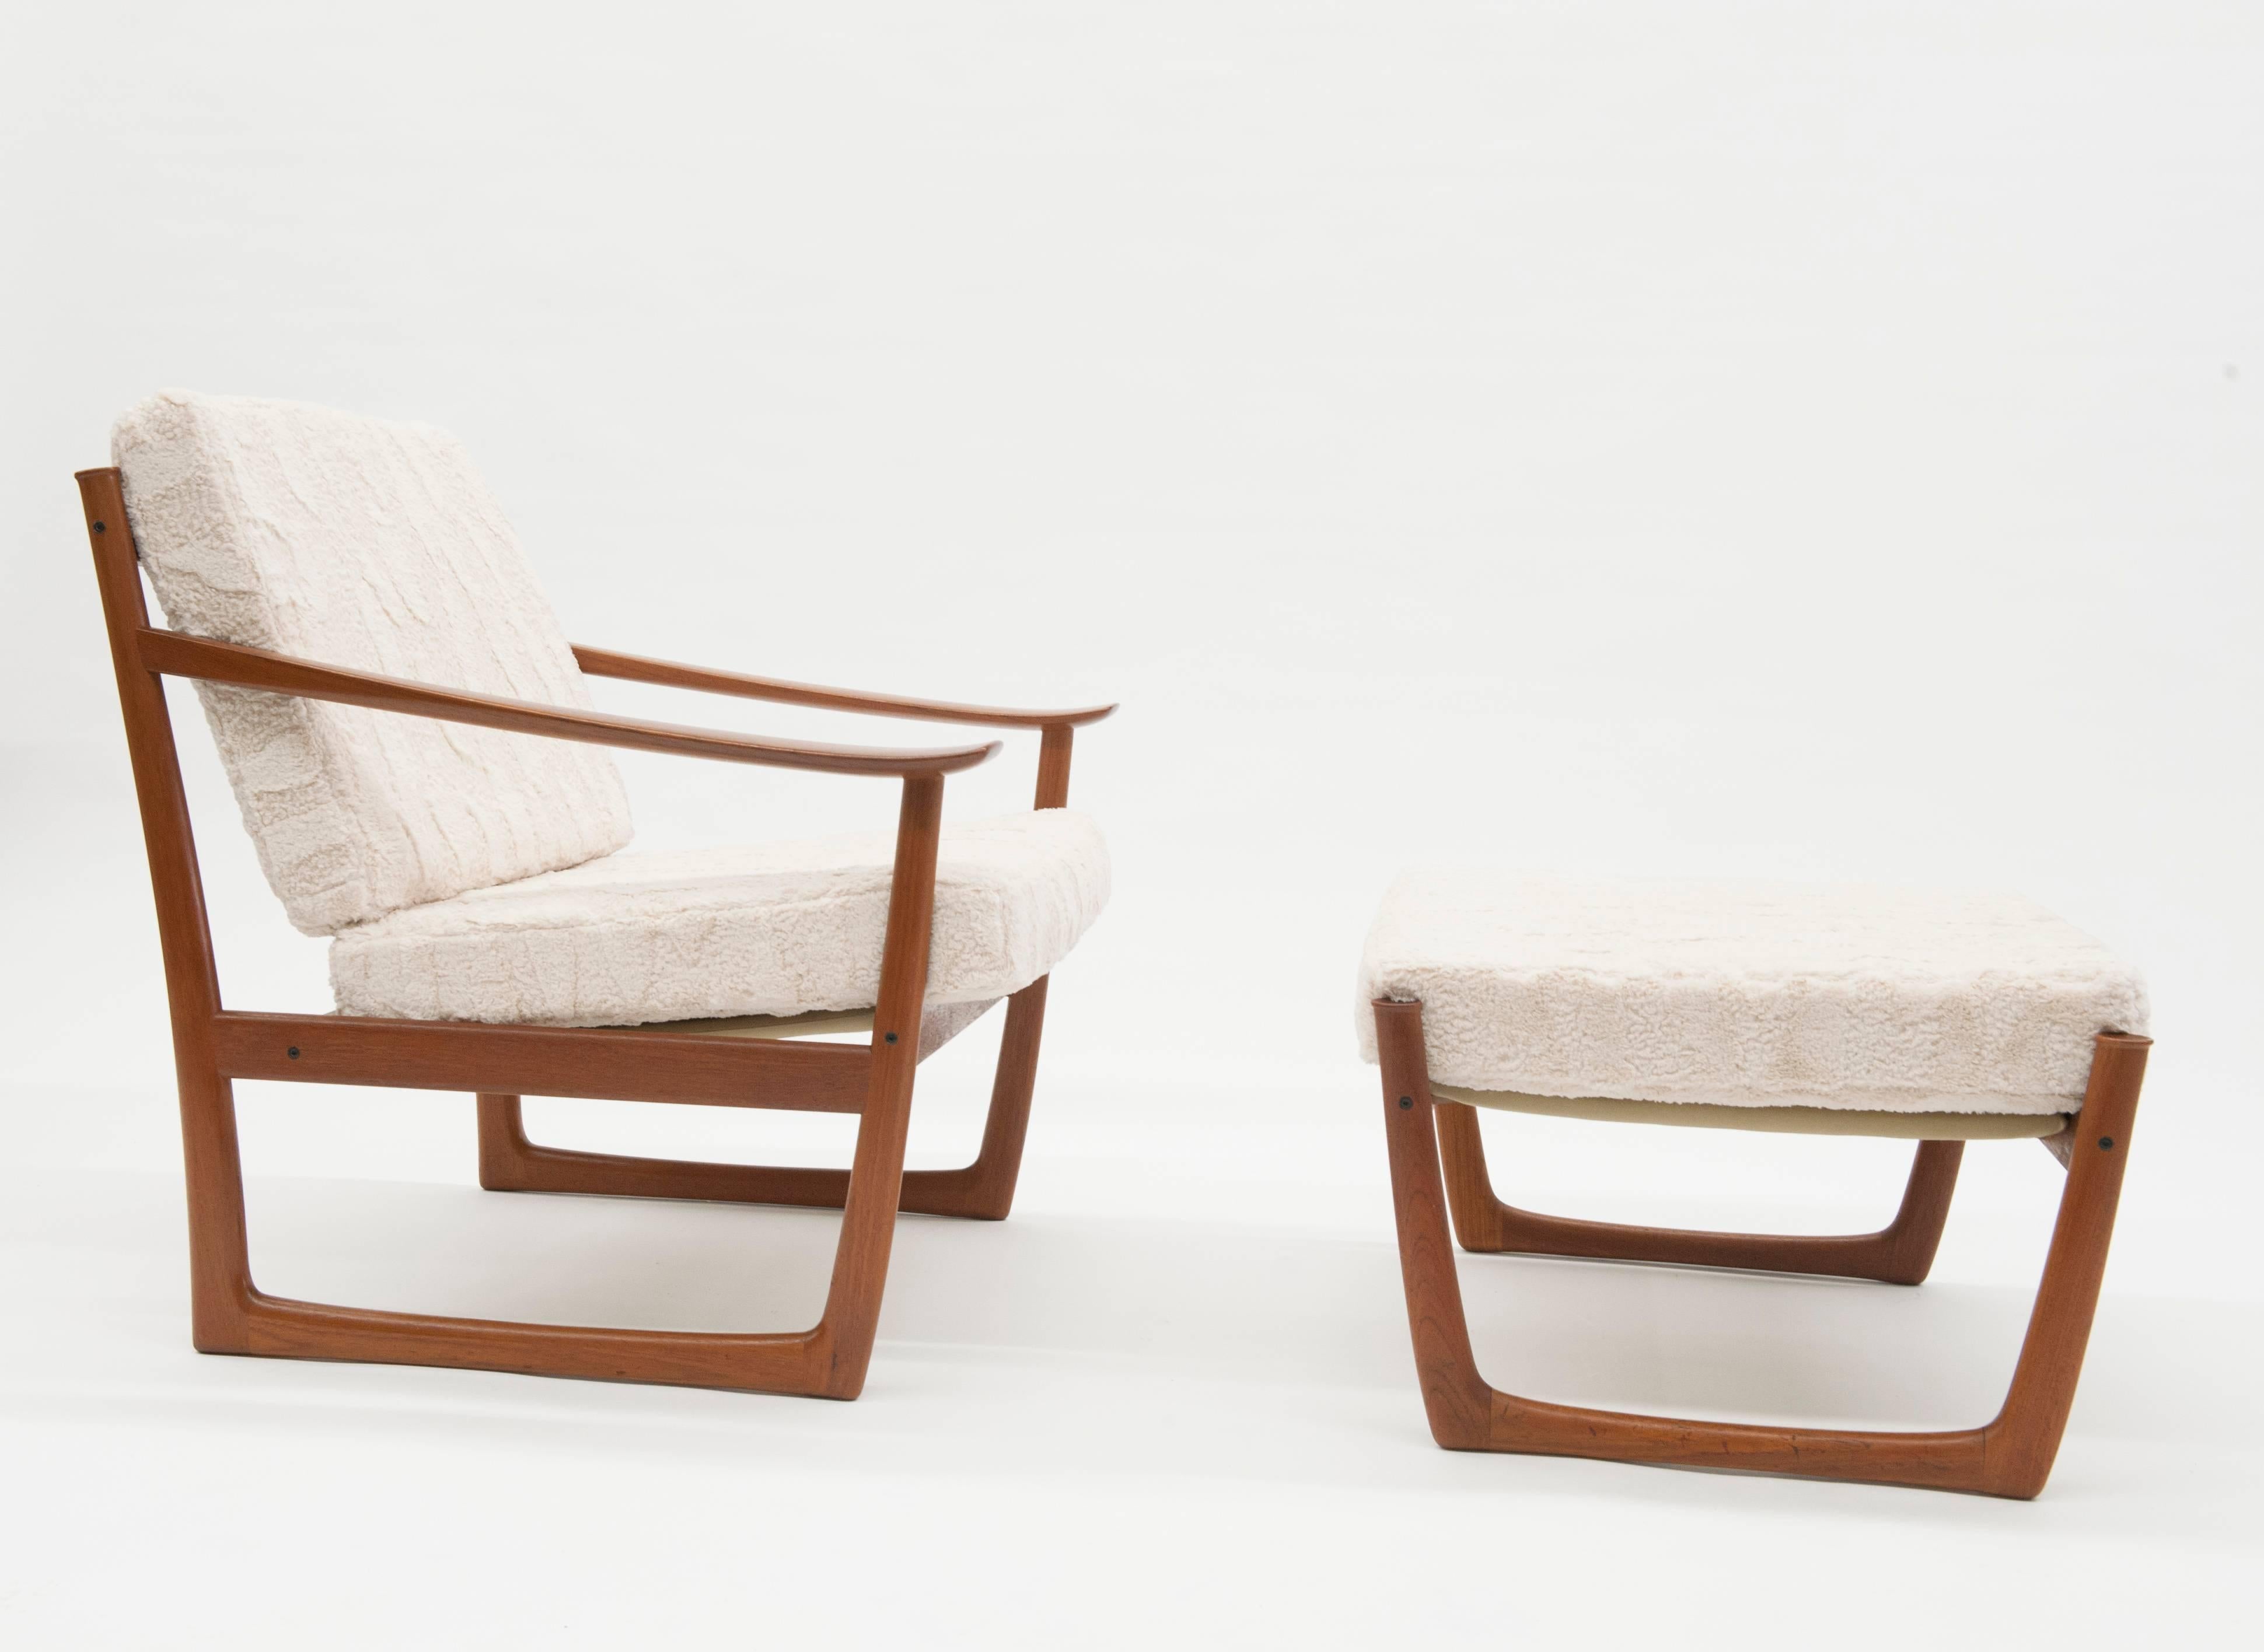 Mid-20th Century Danish Modern Lounge Chair and Ottoman by Peter Hvidt & Orla Mølgaard-Nielsen